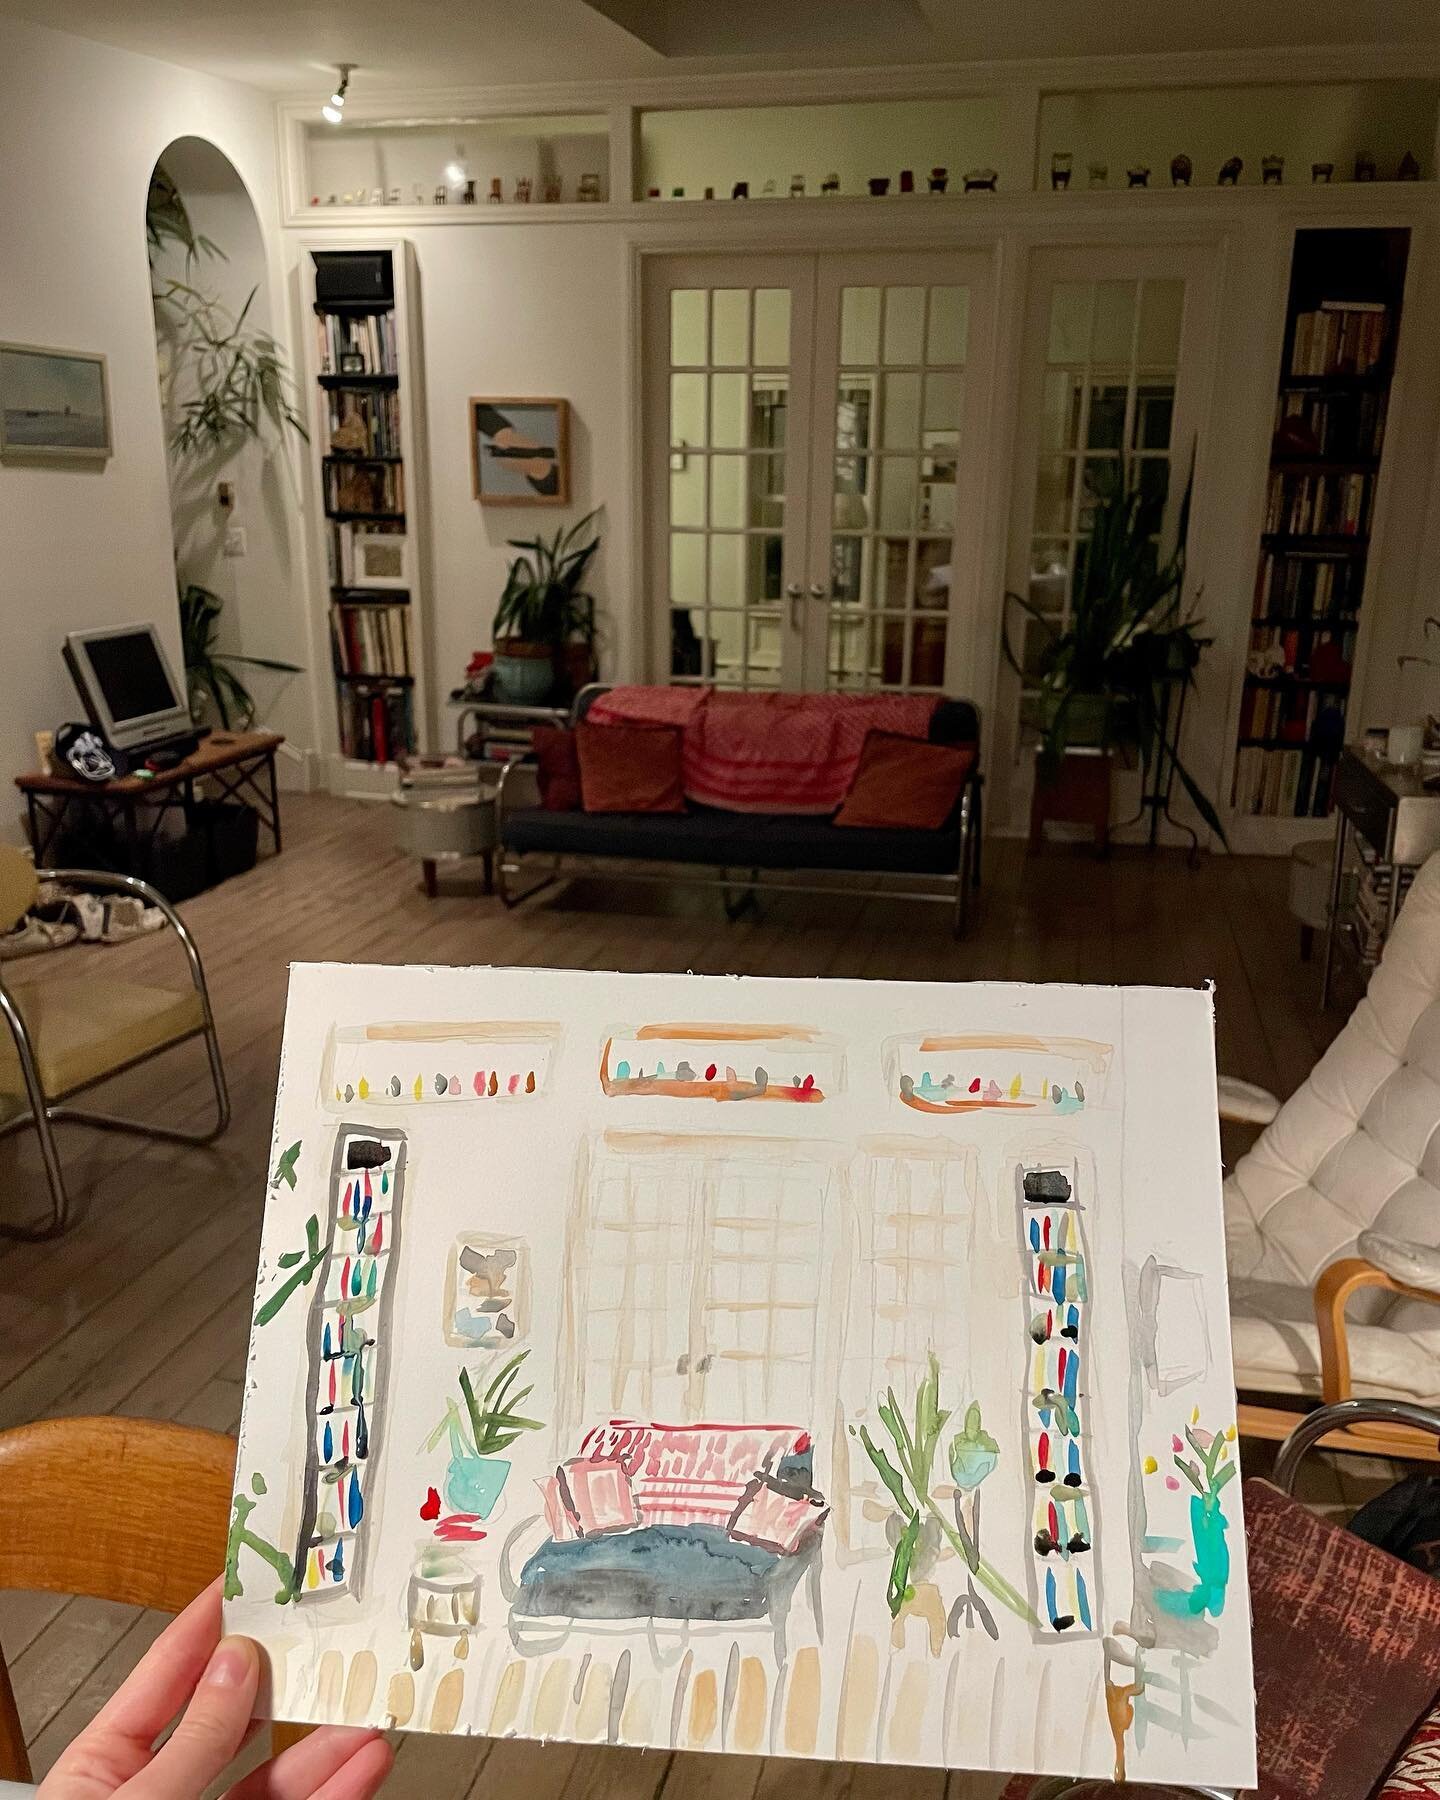 Williamsburg Watercolor Date Night! Mark wanted to commemorate our time in this beautiful sublet so he planned a watercolor date night where we could paint our favorite parts of the space 🥰